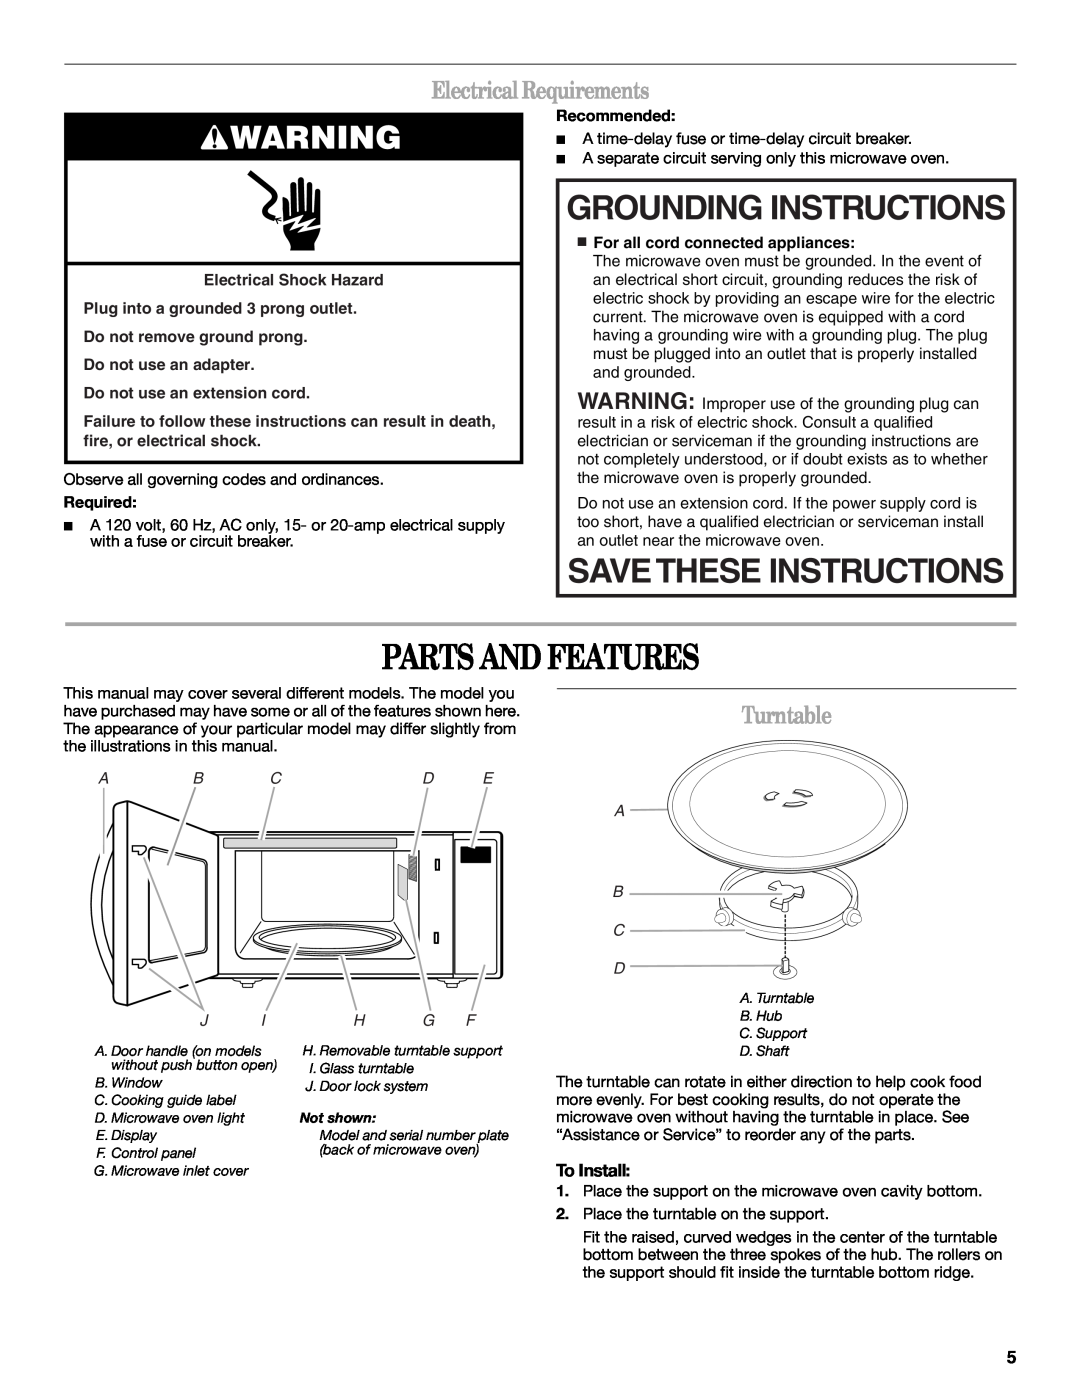 Whirlpool WMC10511AB Parts And Features, Grounding Instructions, Savethese Instructions, Electrical Requirements, Required 